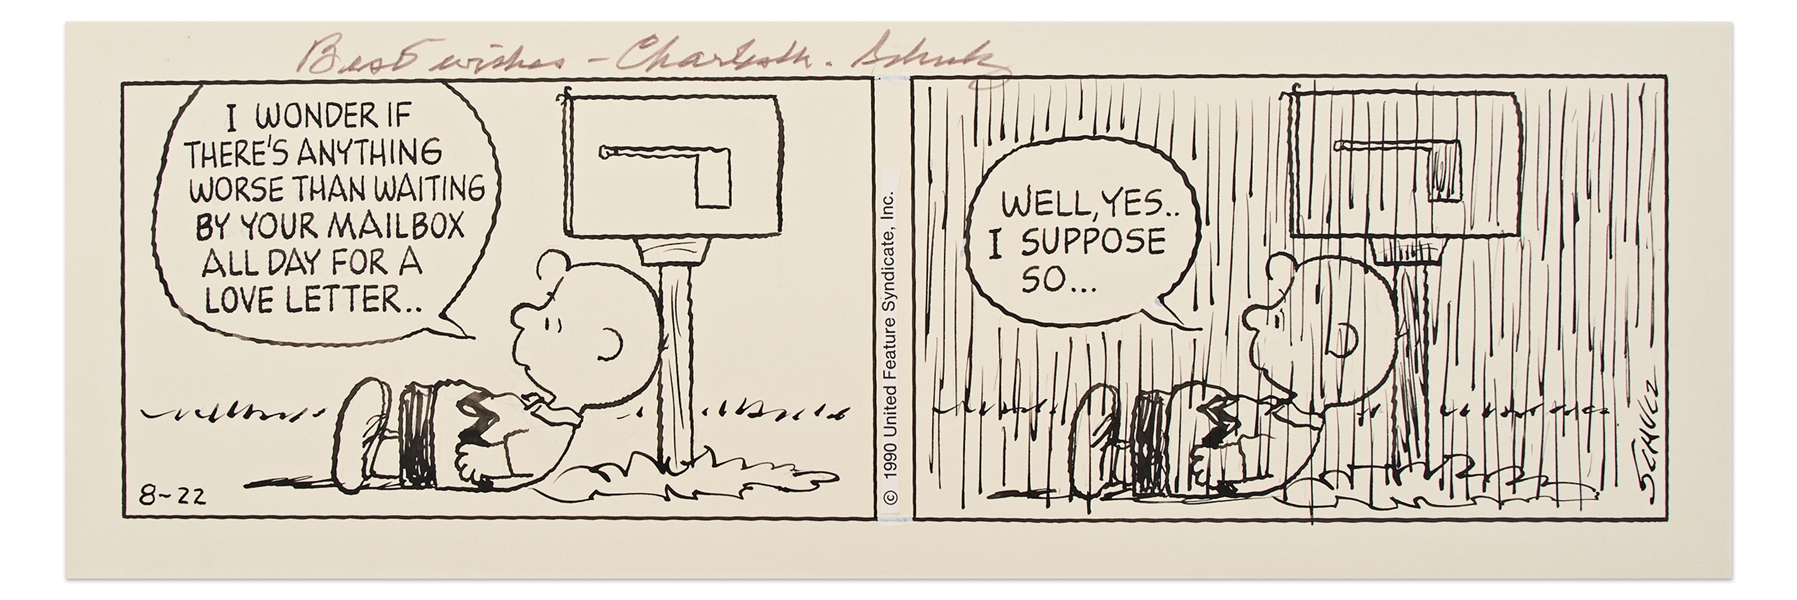 Original ''Peanuts'' Strip Hand-Drawn by Charles Schulz from 1990 -- Charlie Brown Waits for a Love Letter